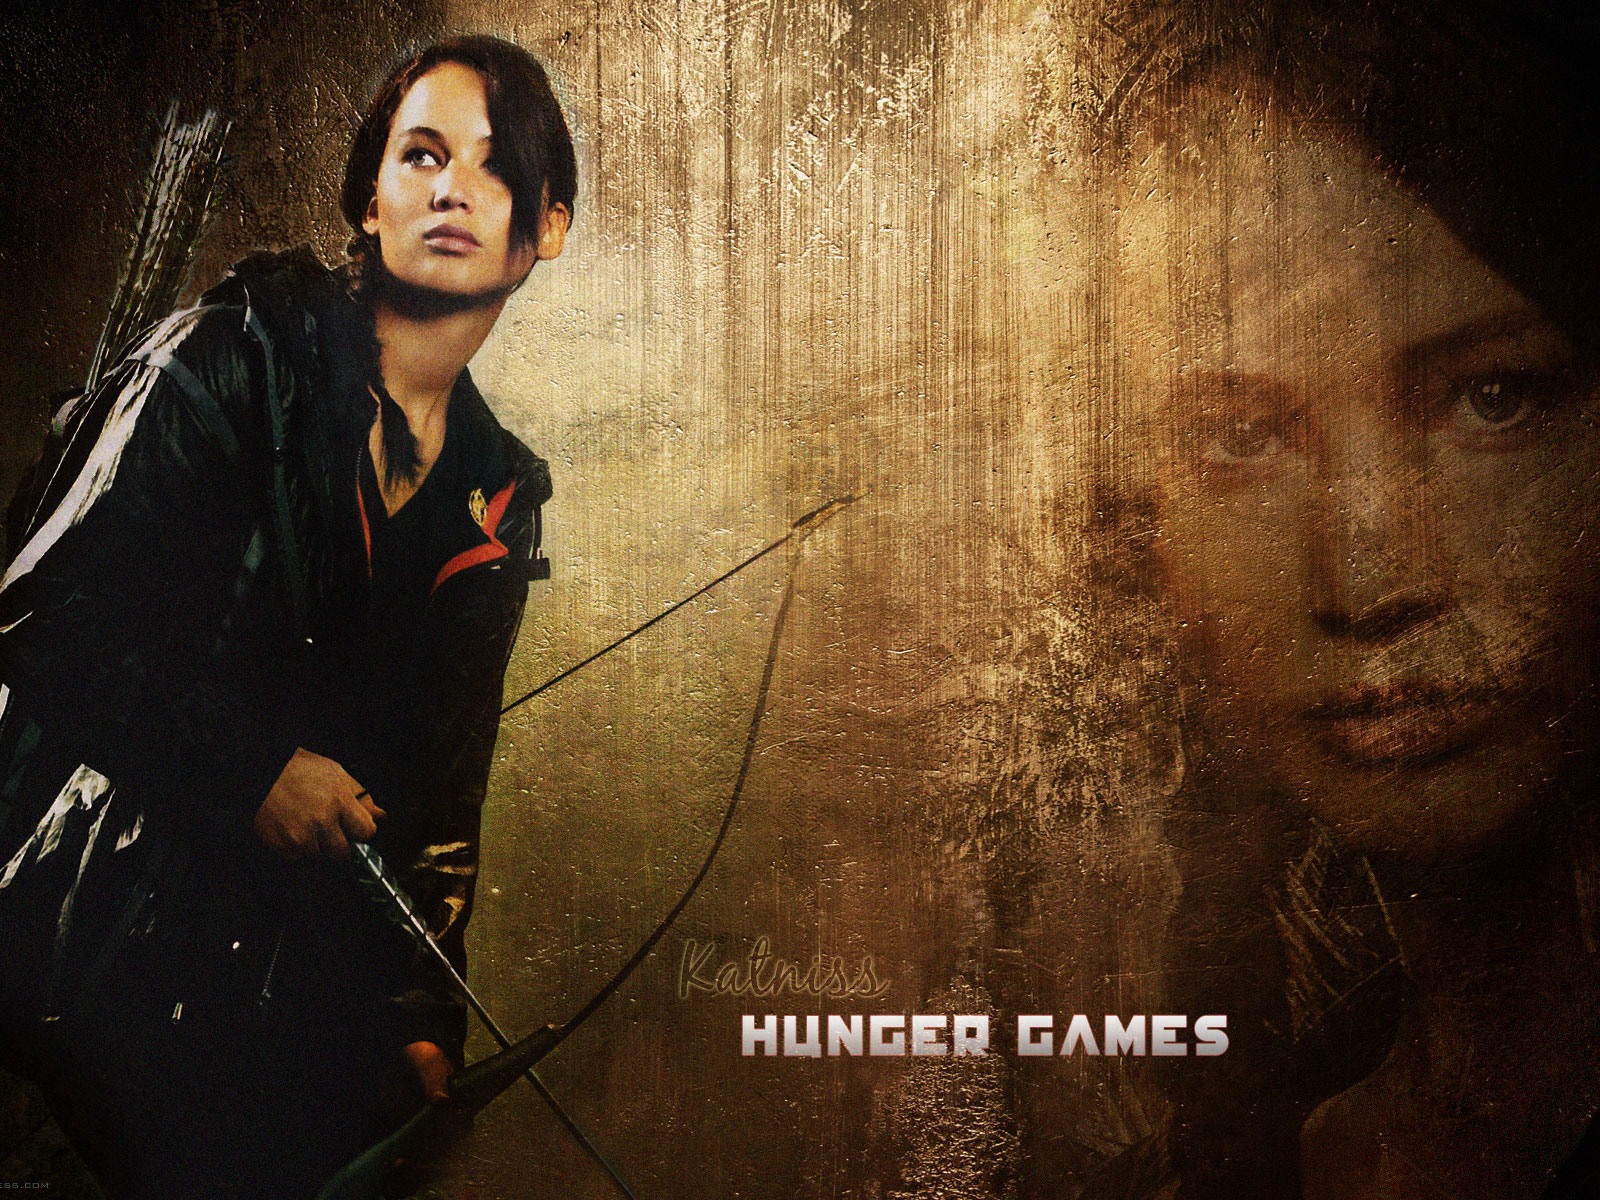 The Hunger Games HD wallpapers #8 - 1600x1200